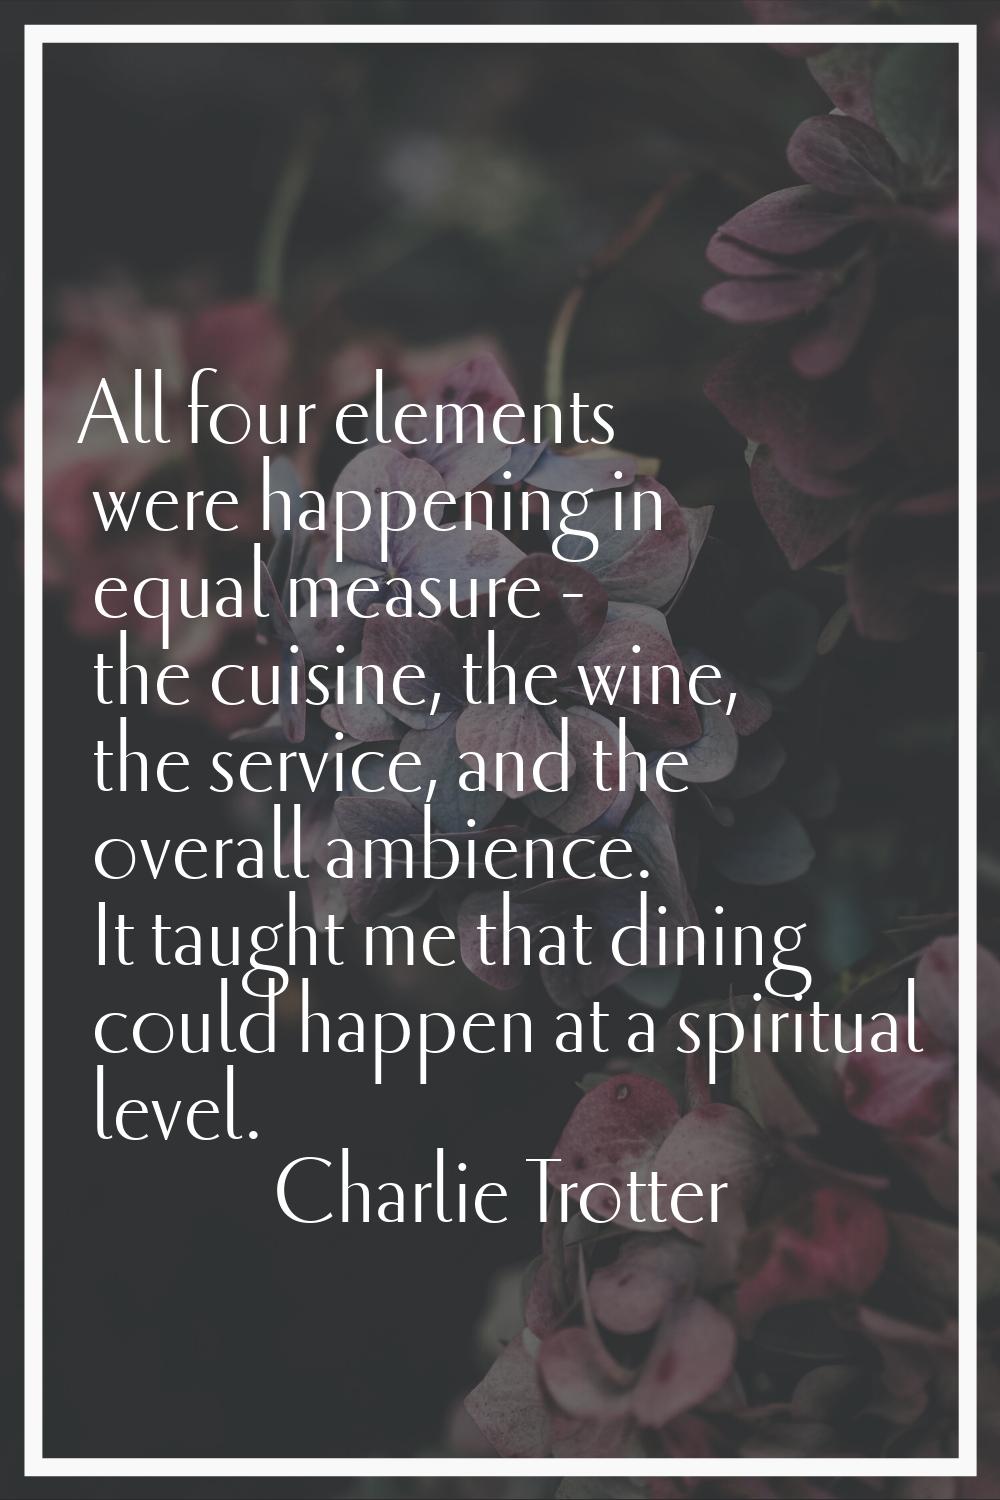 All four elements were happening in equal measure - the cuisine, the wine, the service, and the ove